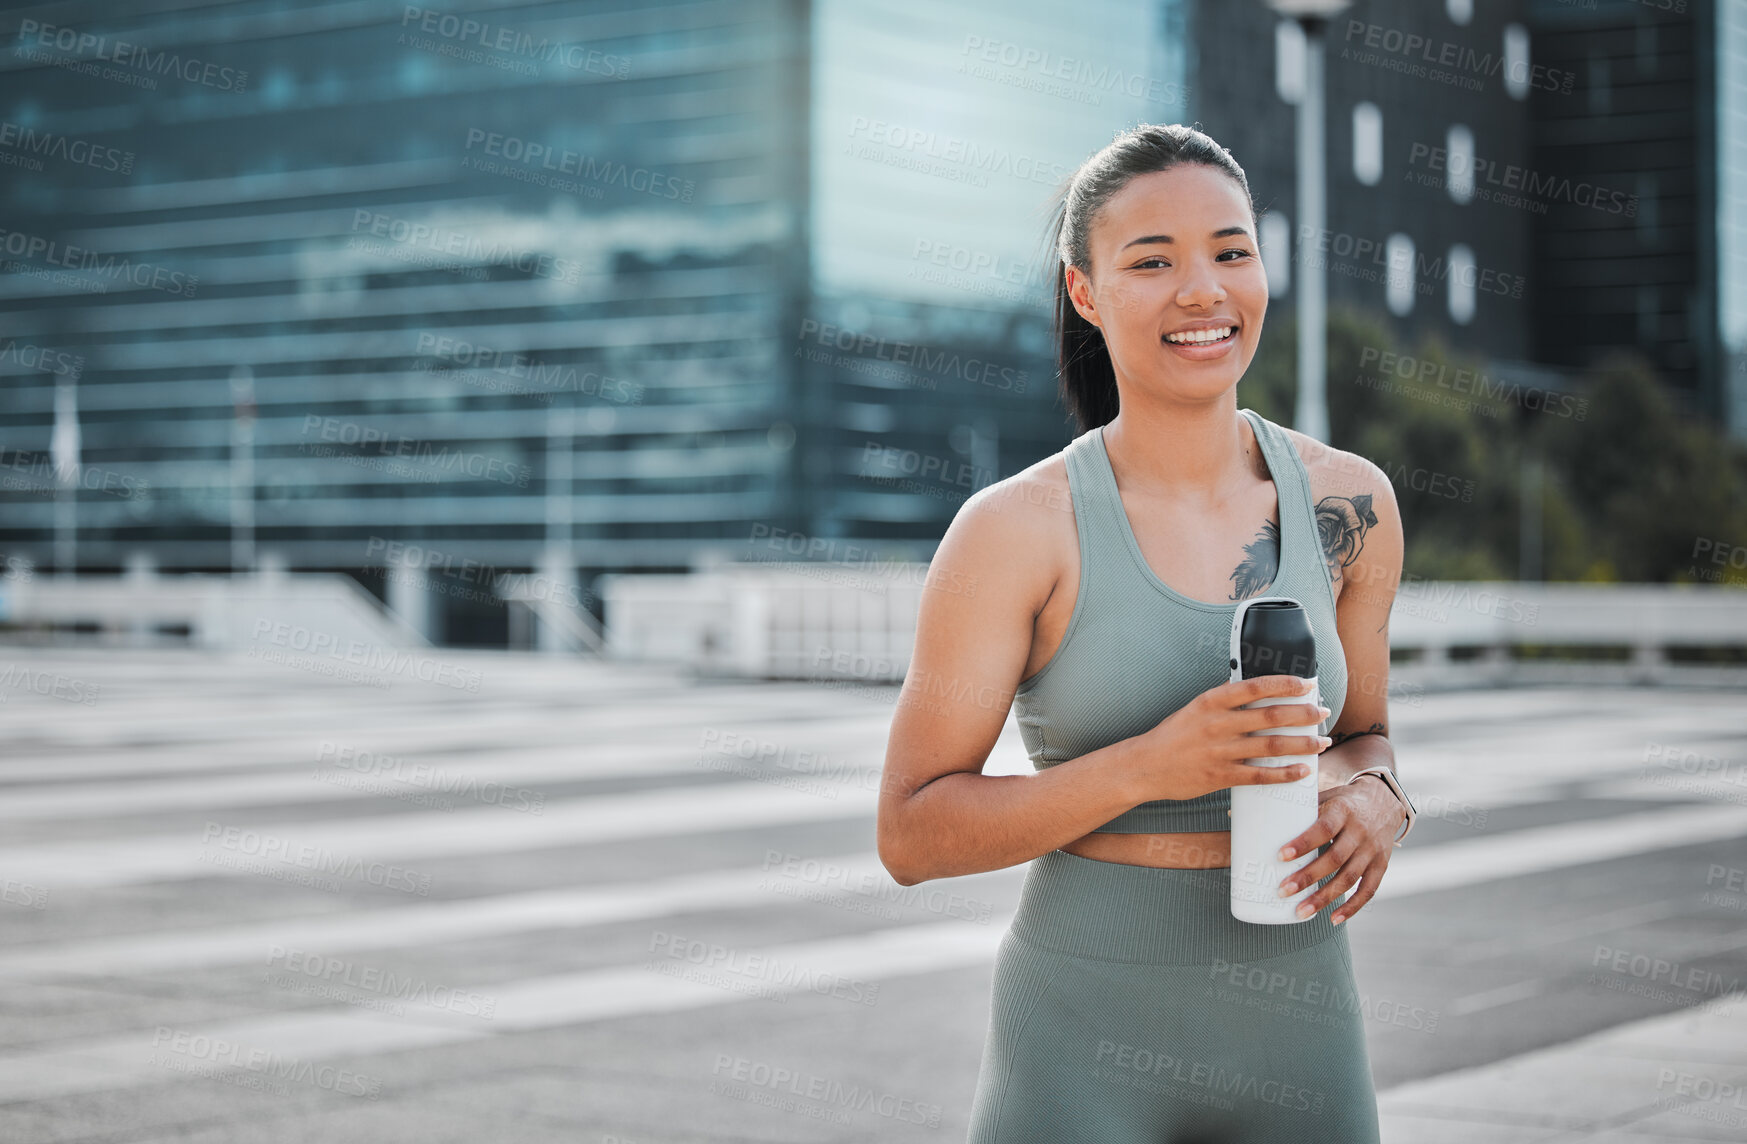 Buy stock photo Young mixed race fit female athlete smiling and looking happy while taking a break resting drinking water and working out outside in the city. Exercise is good for your health and wellbeing